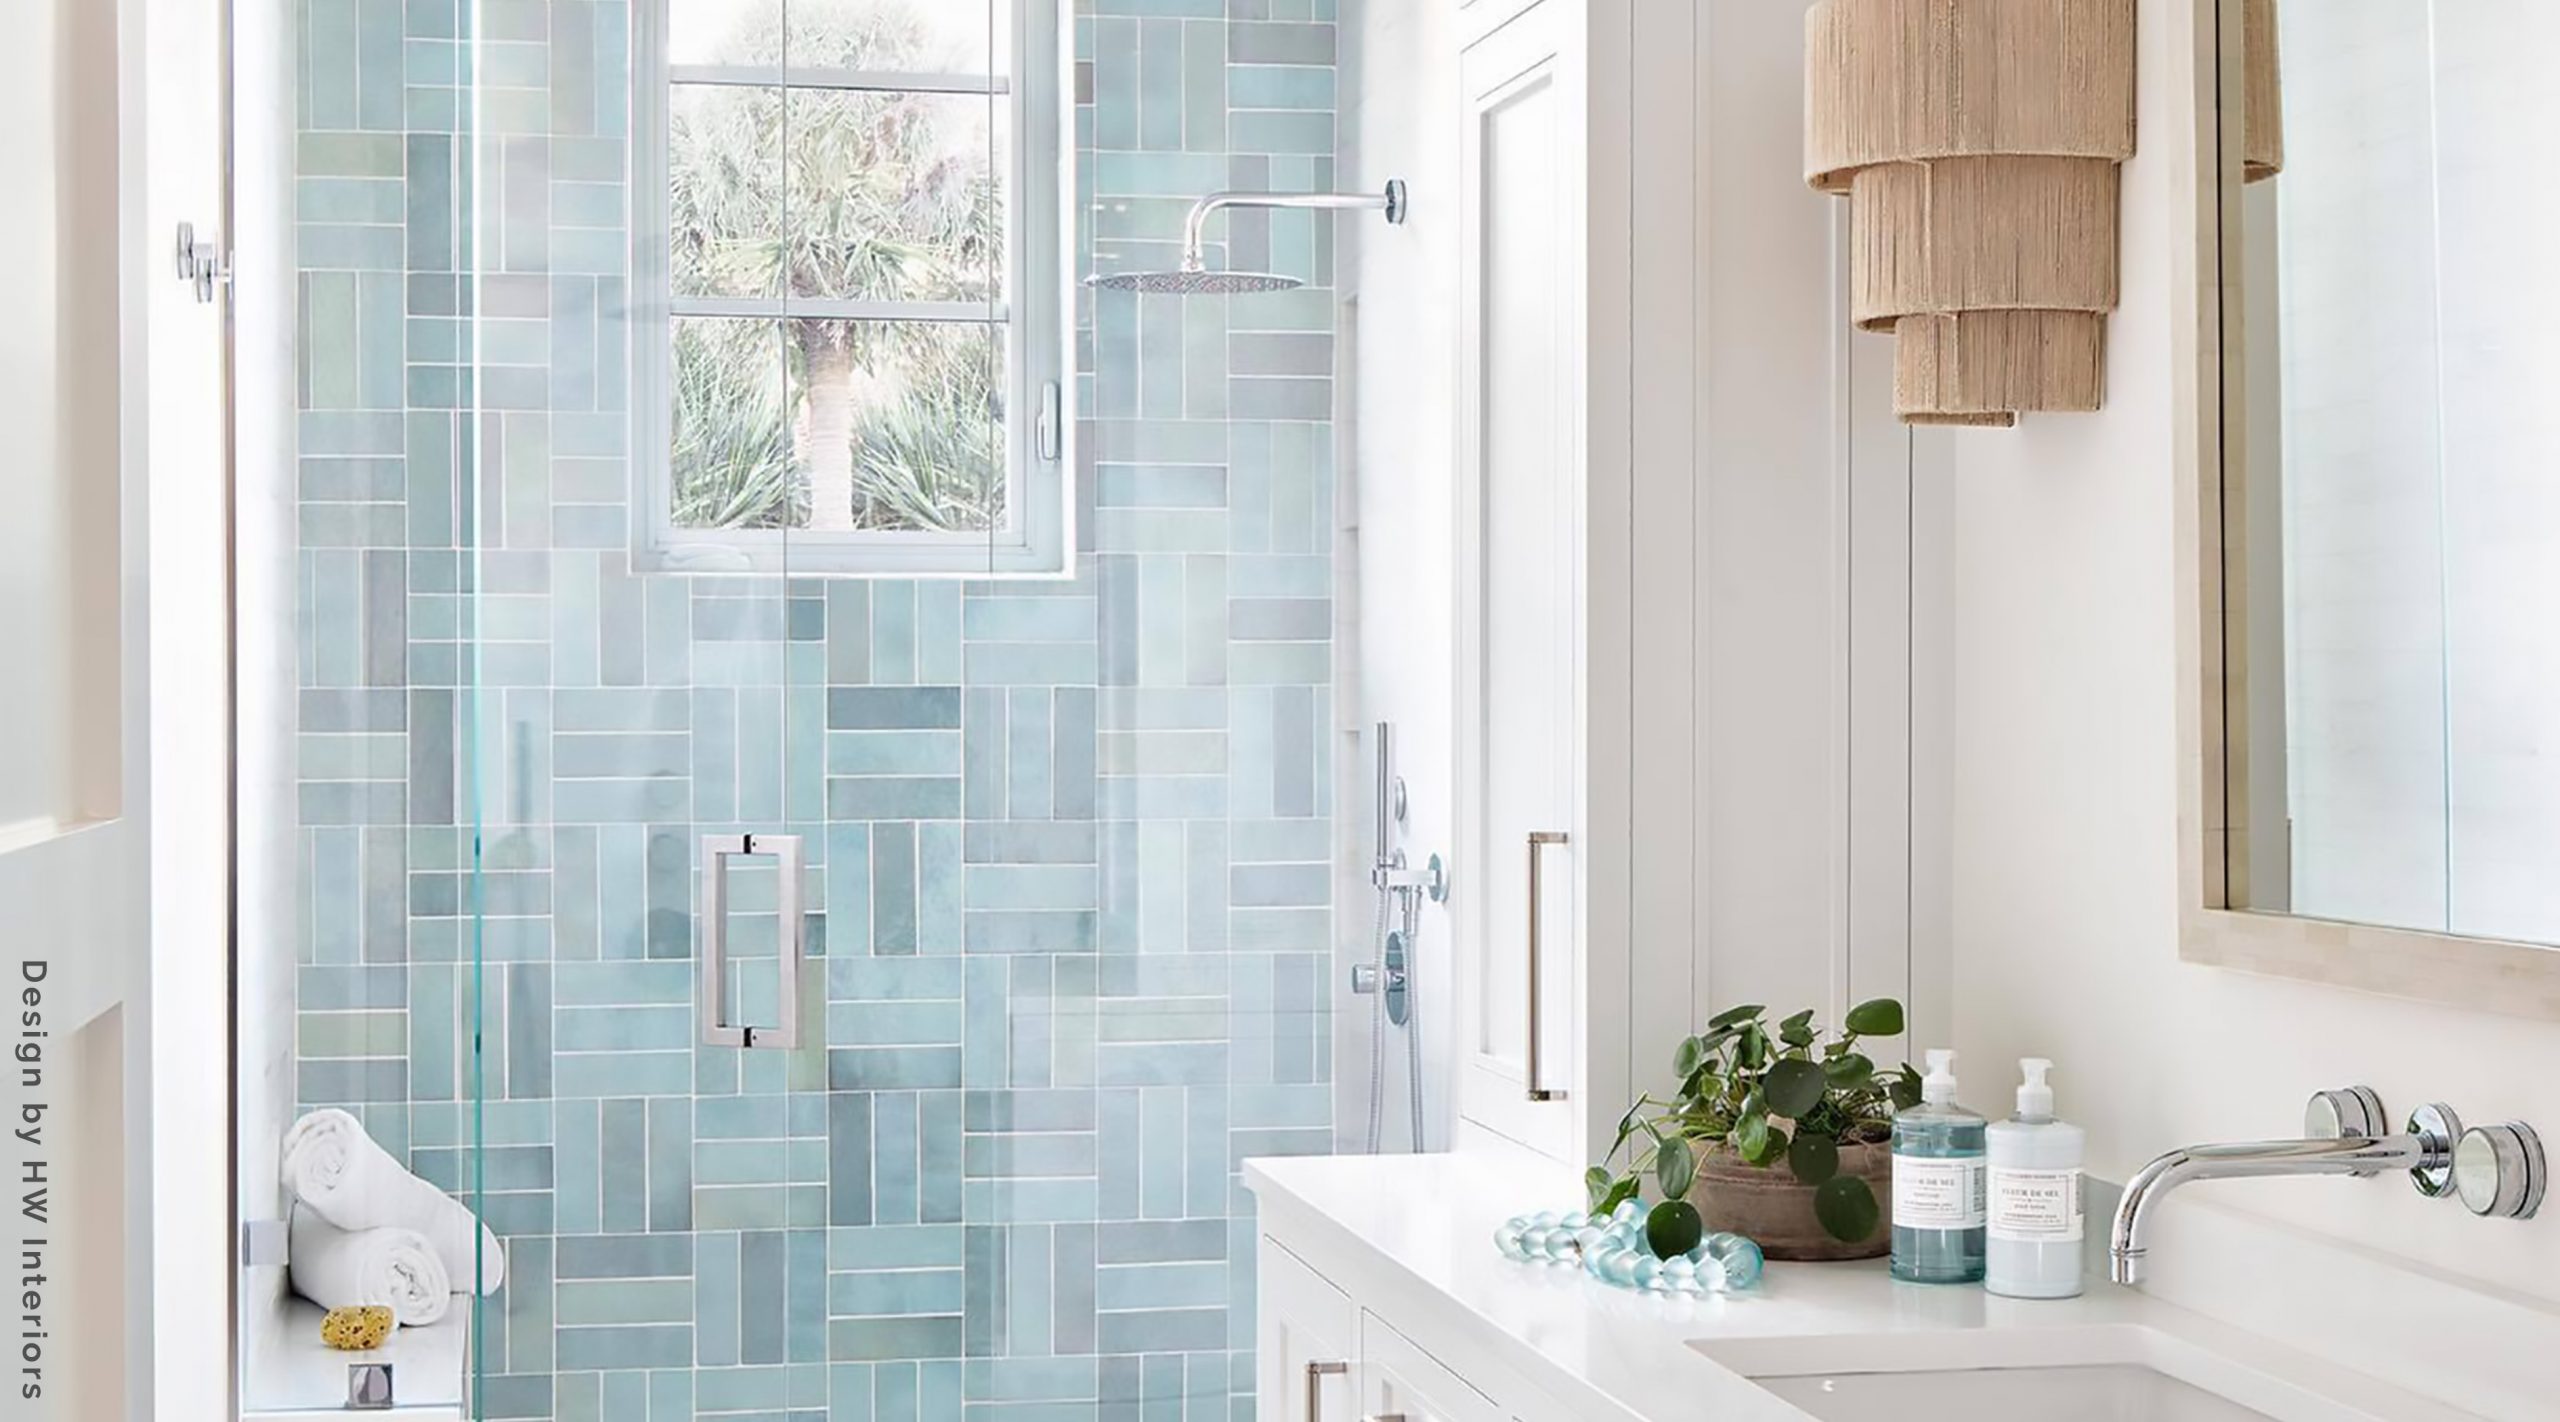 How To Choose Shower Tile Best Tiles, What Size Tile Is Recommended For A Small Bathroom